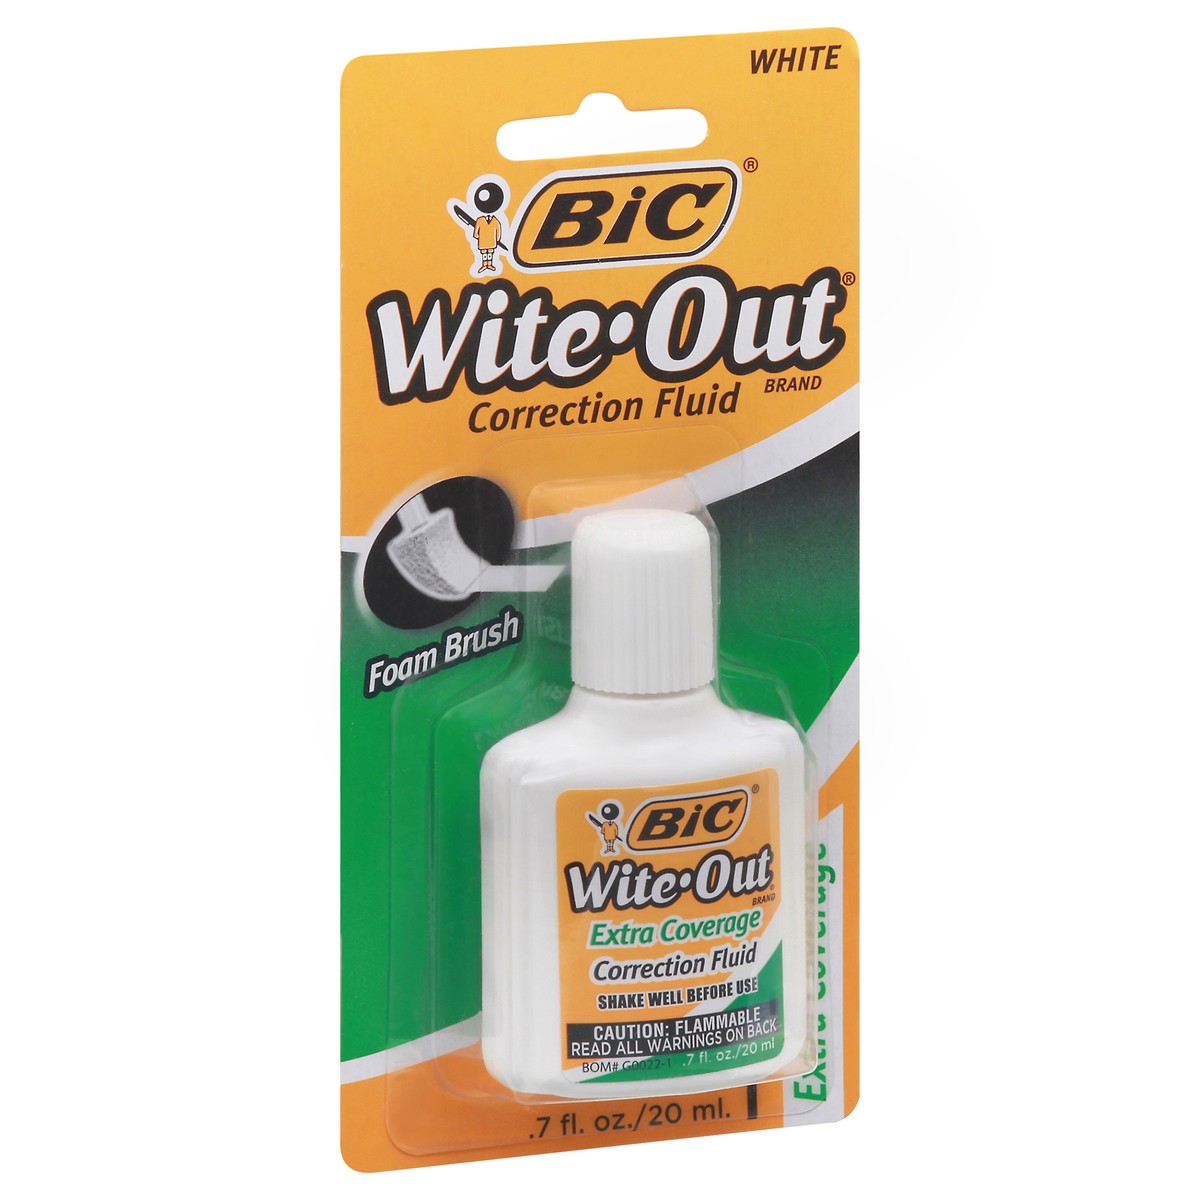 slide 10 of 10, BIC Wite-Out White Extra Coverage Correction Fluid 0.7 fl oz, 0.7 fl oz